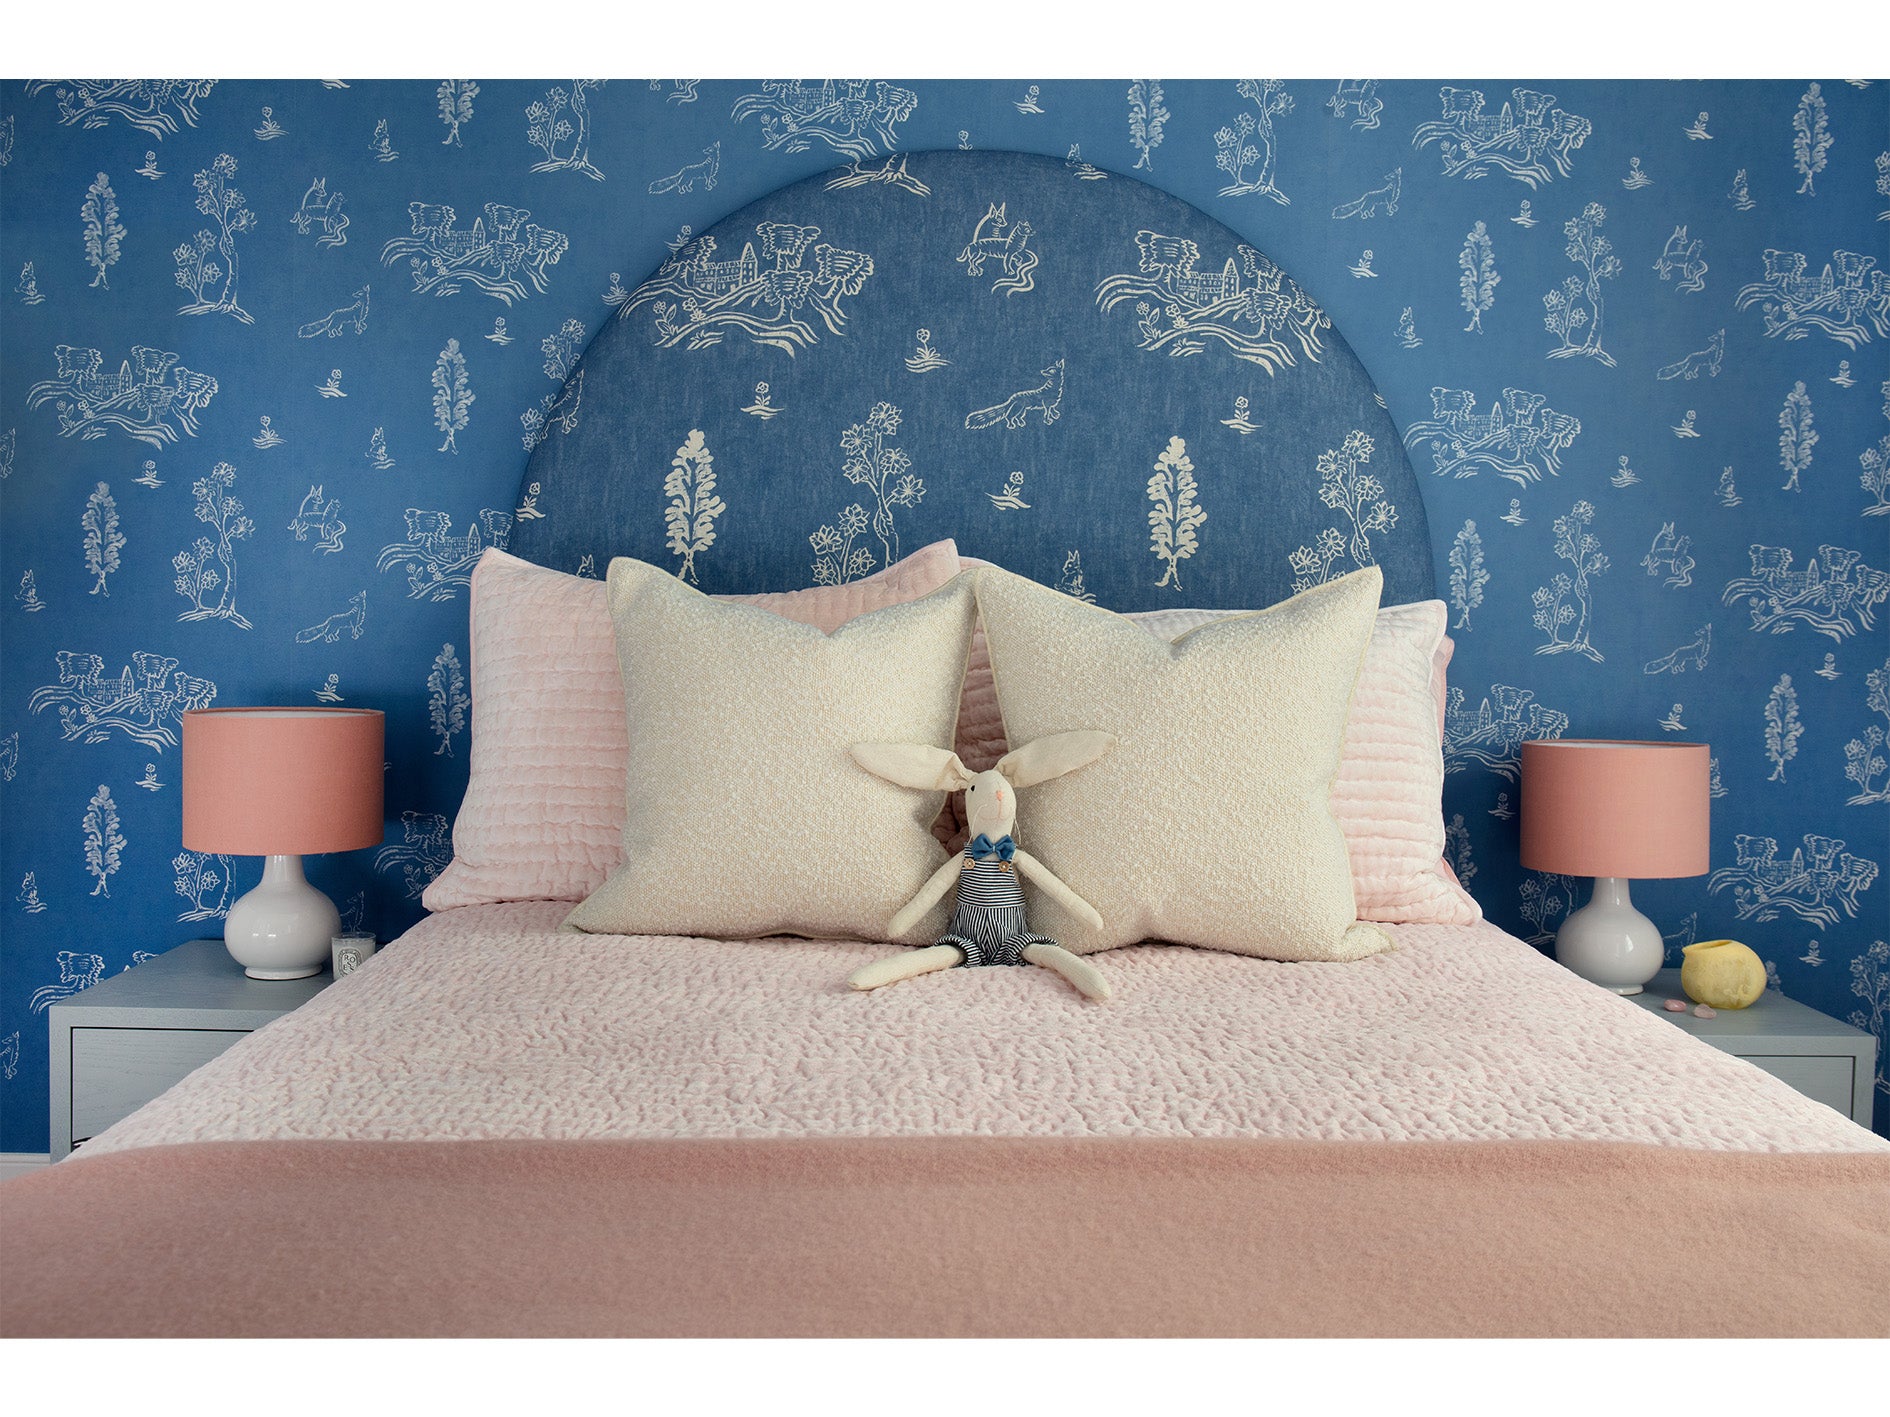 Little Girls Bedroom with Blue Wallpaper and matching Headboard